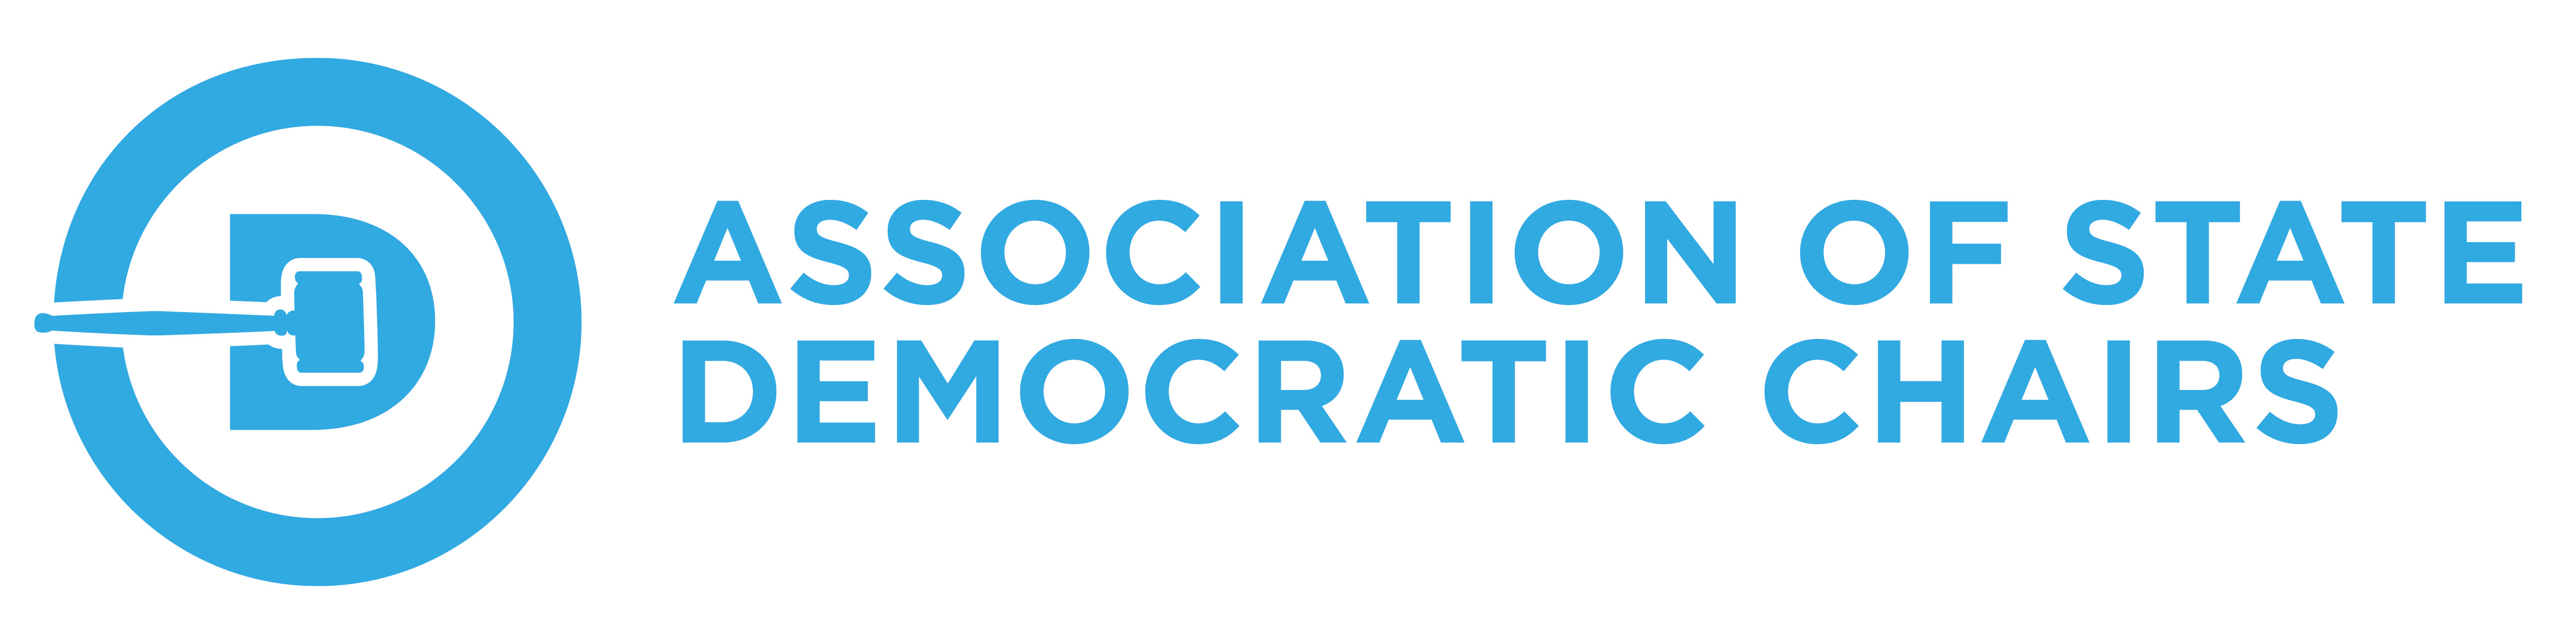 Association of State Democratic Chairs